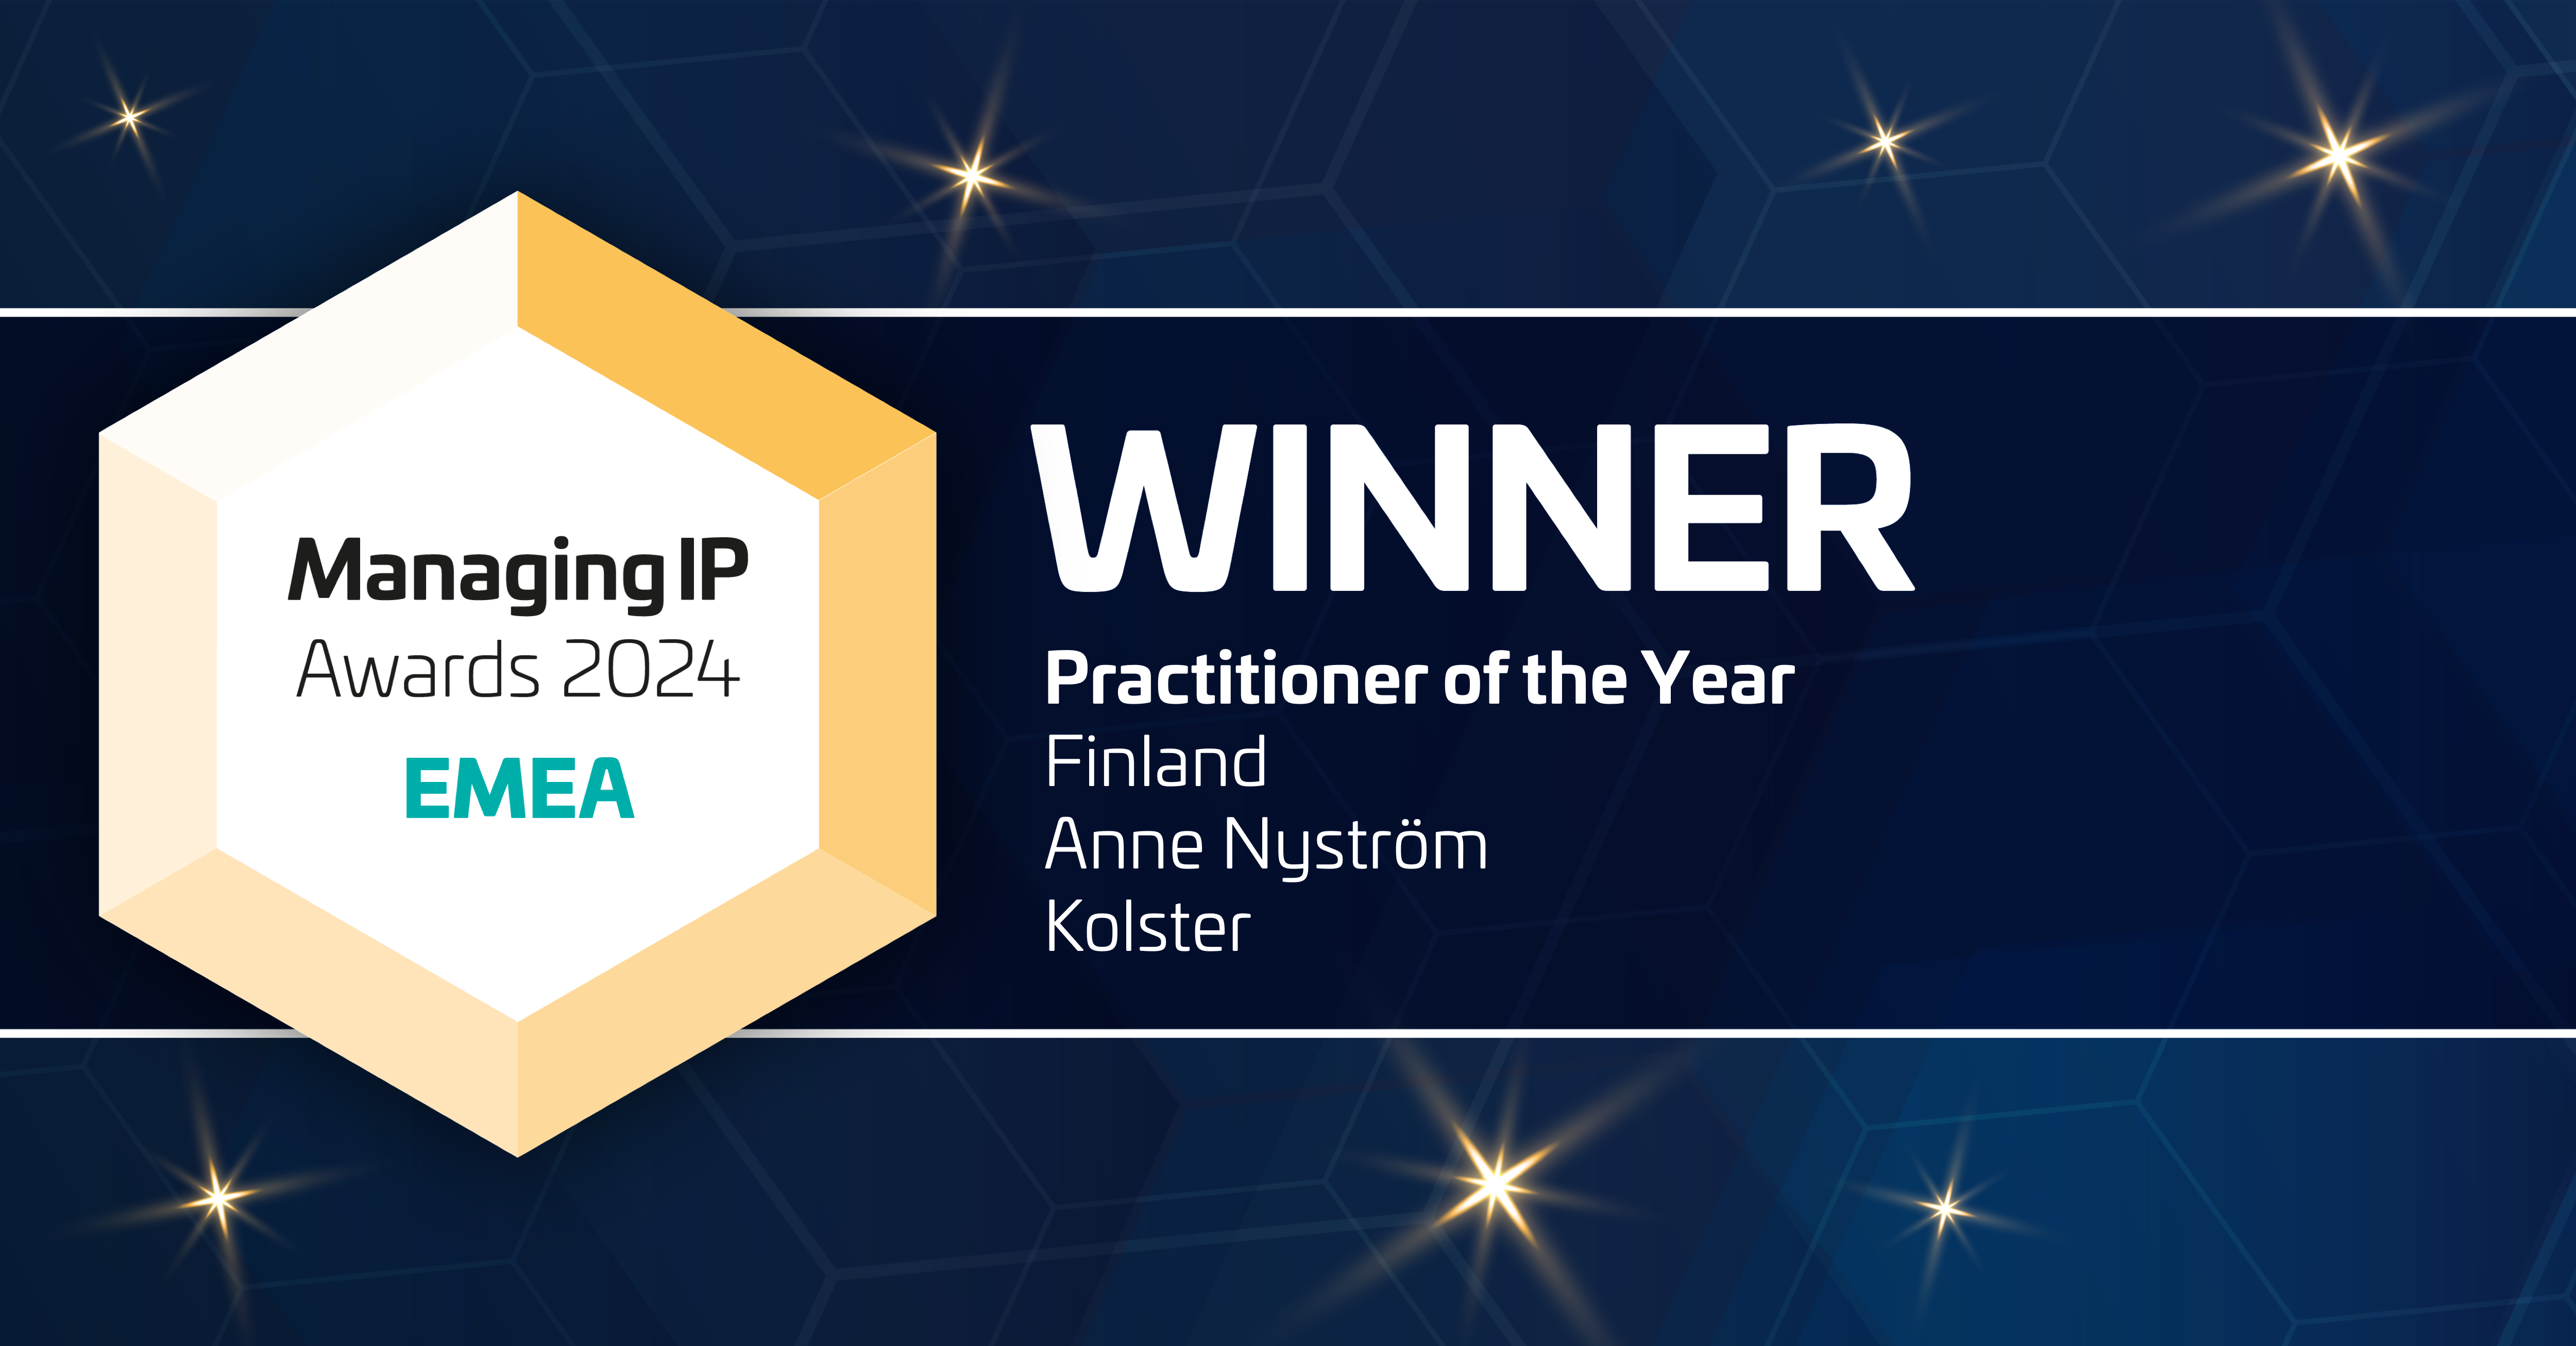 Kolster - Finland Practitioner of the Year